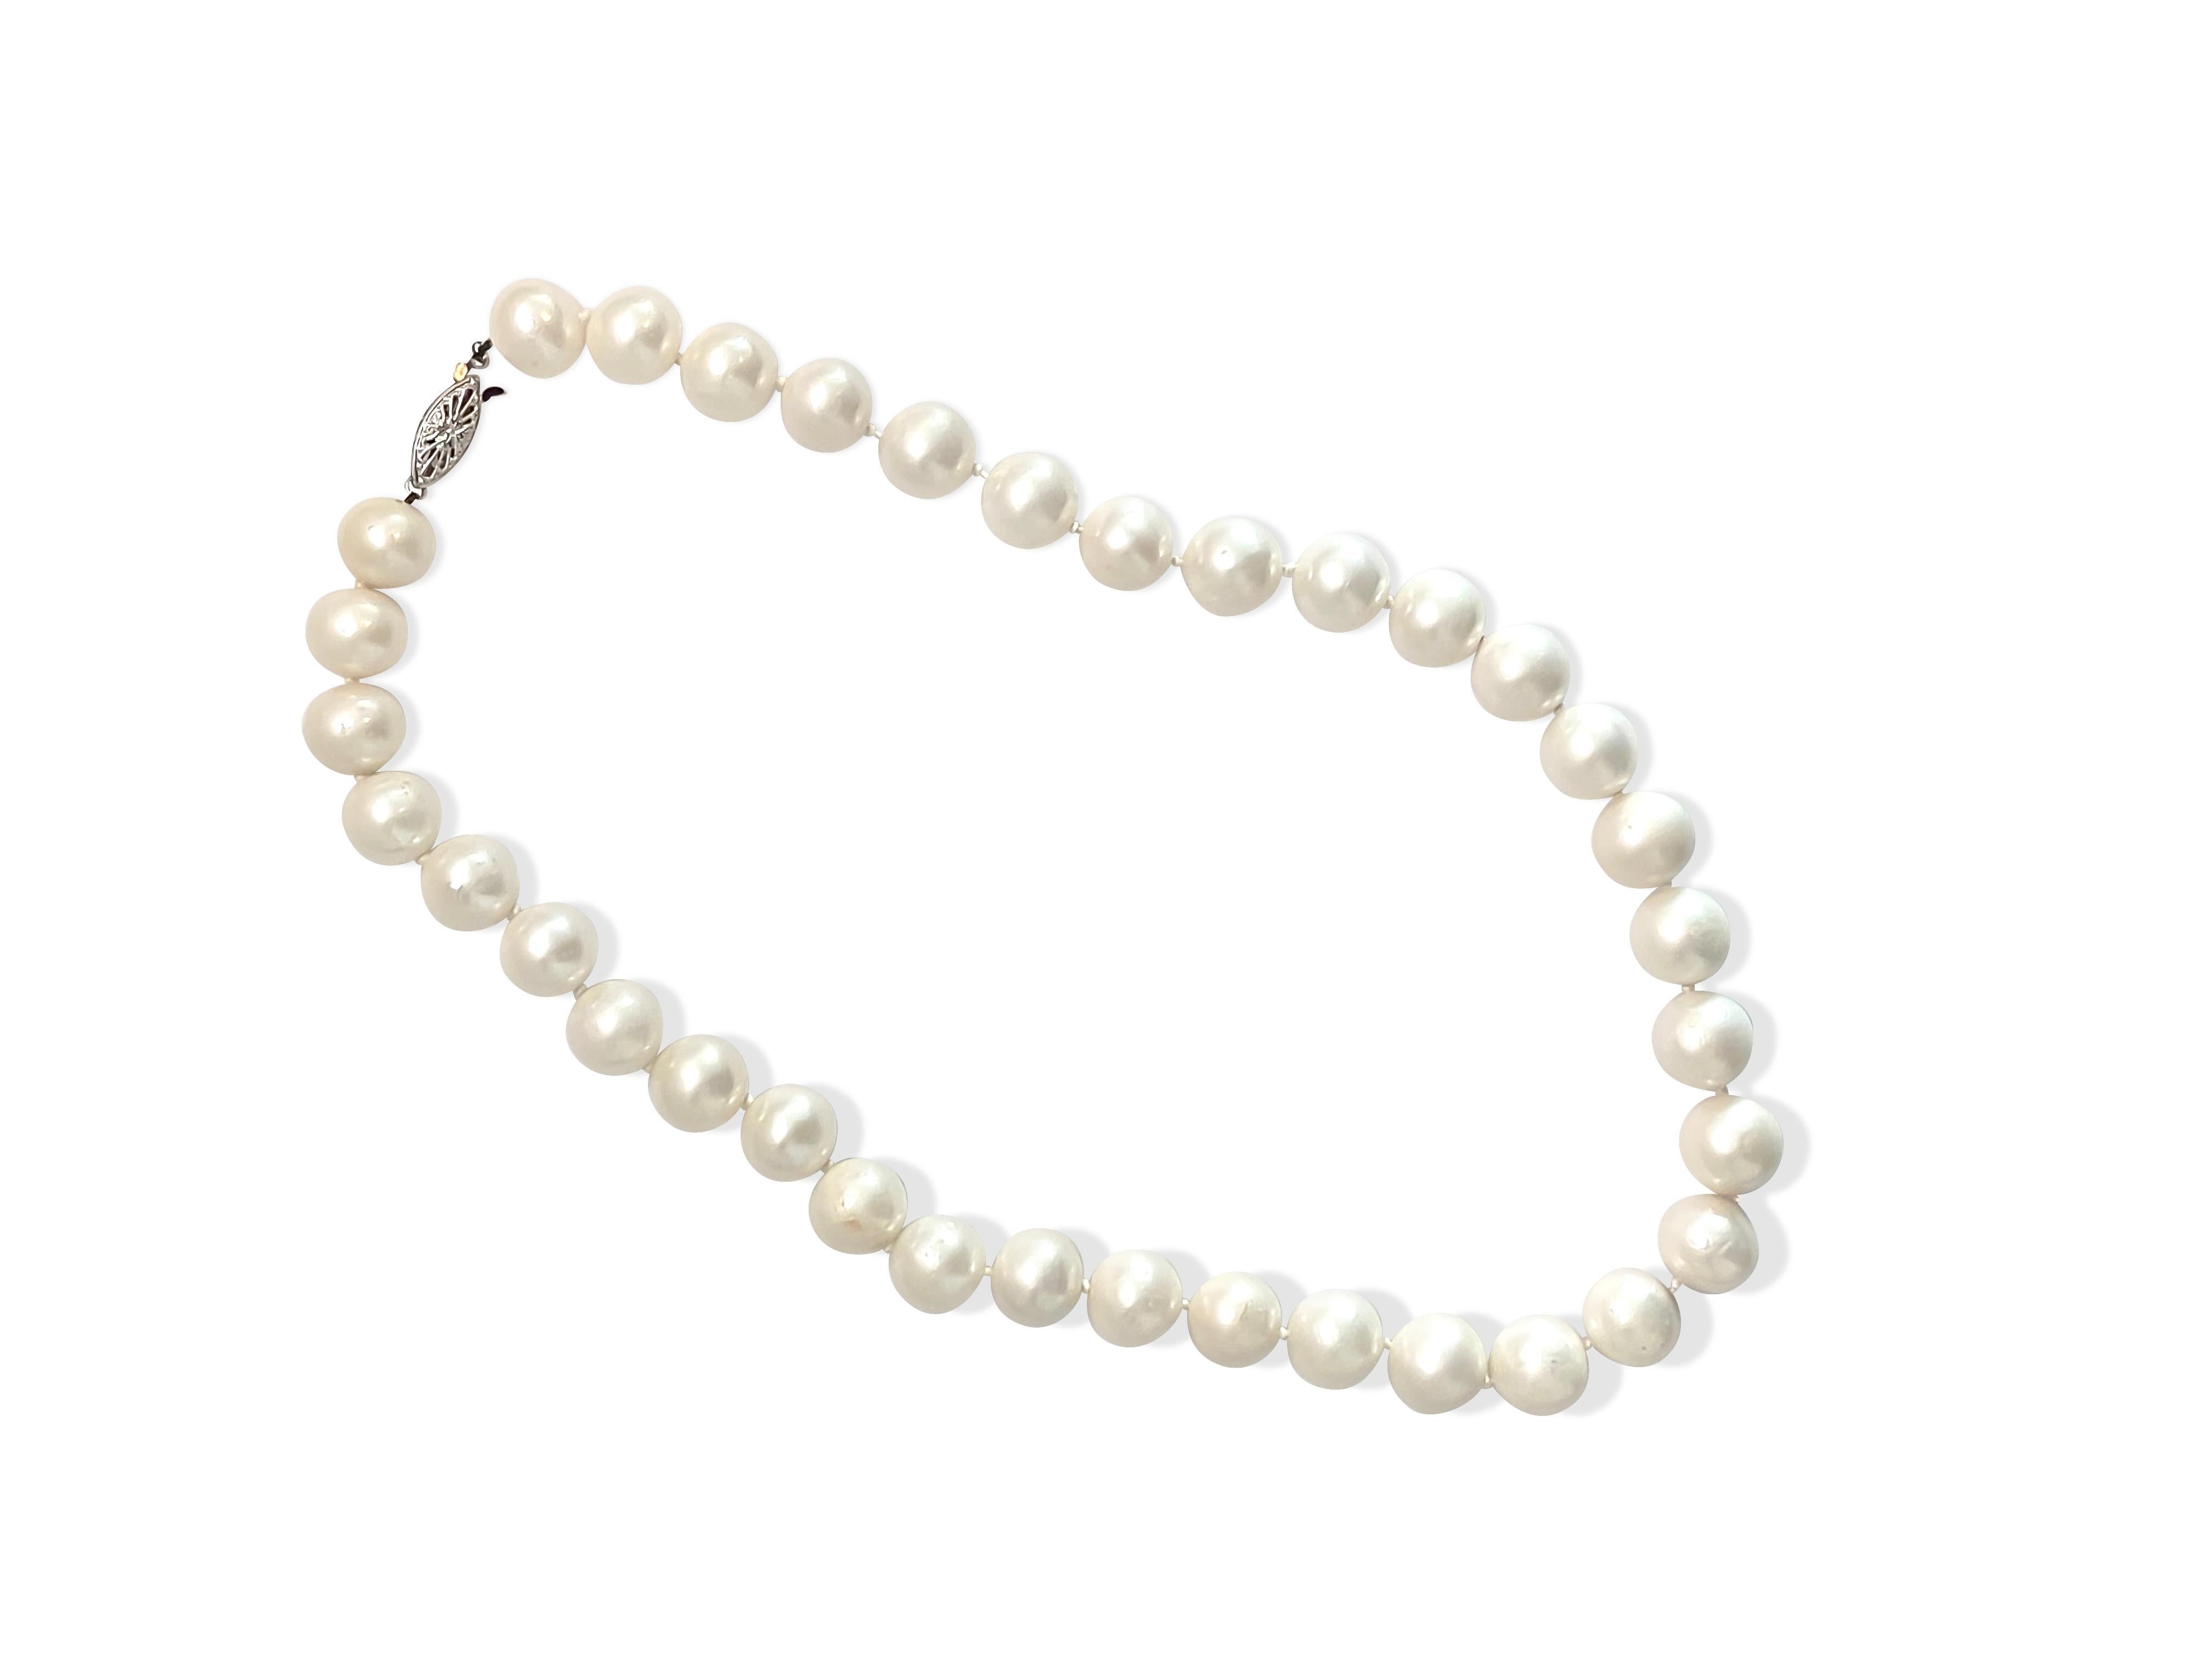 Metal: 14k White Gold 

100% natural fresh water pearl. Shape: round. Color: Pastel white. Finish: excellent. Setting: Stringed. 

Beautiful womens pearl necklace. Modern style pearl necklace